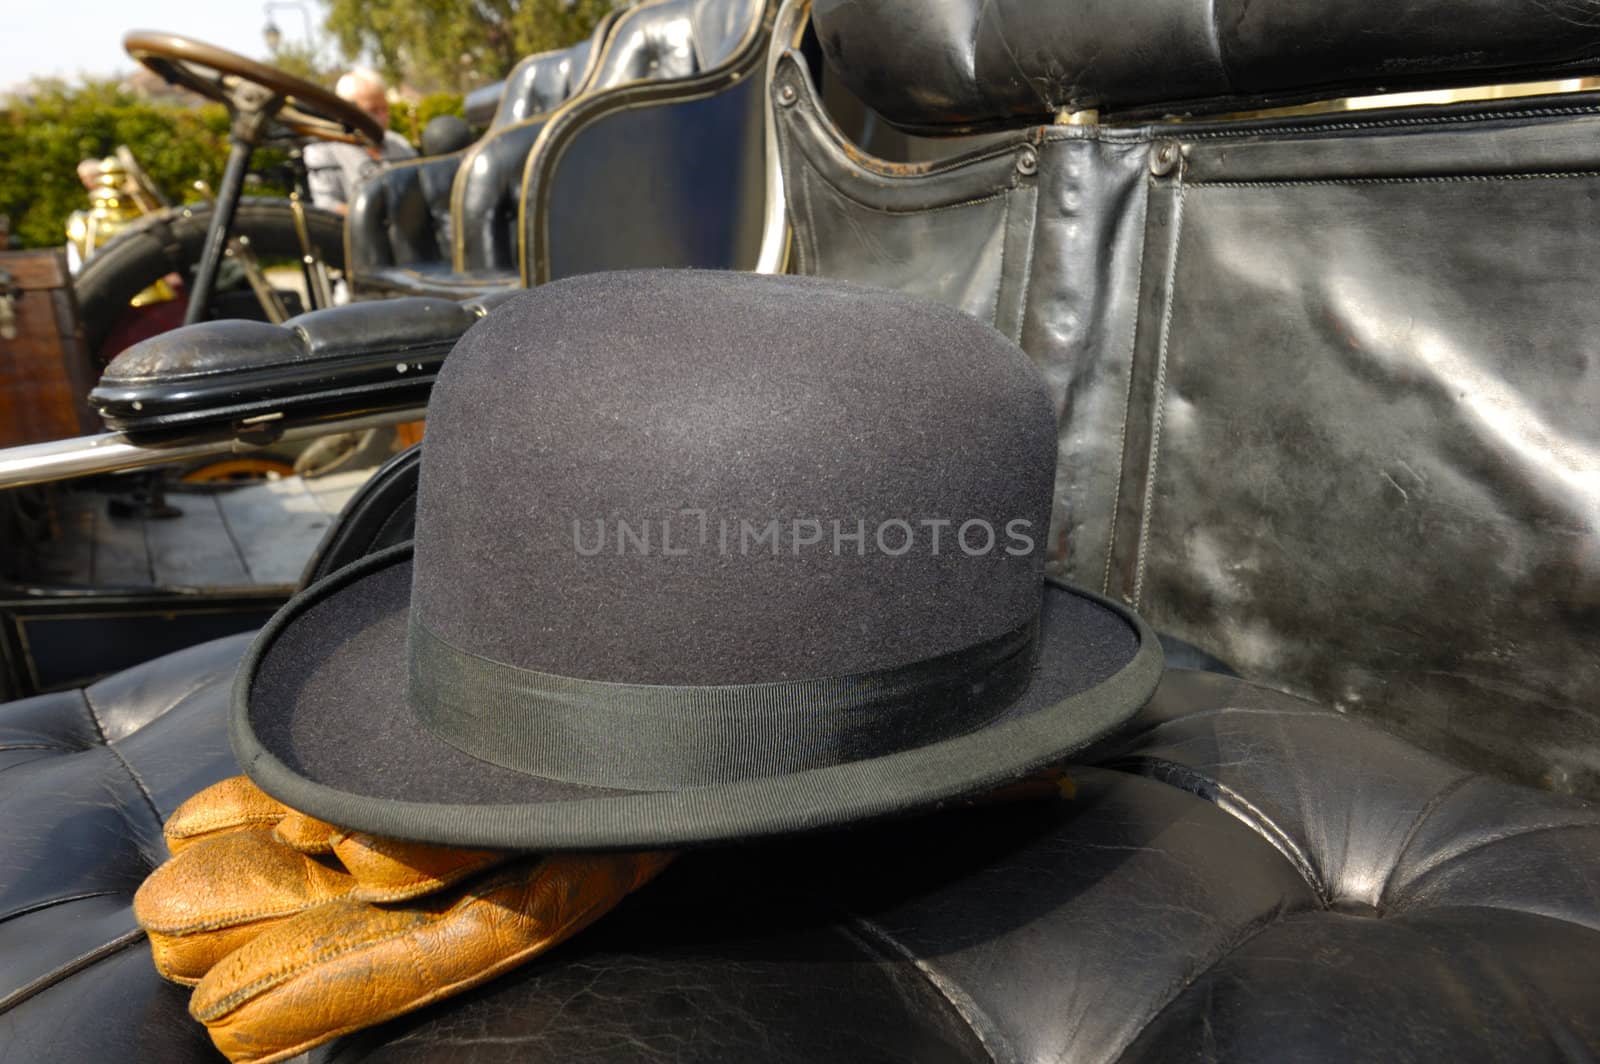 Bowler hat and gloves by Bateleur